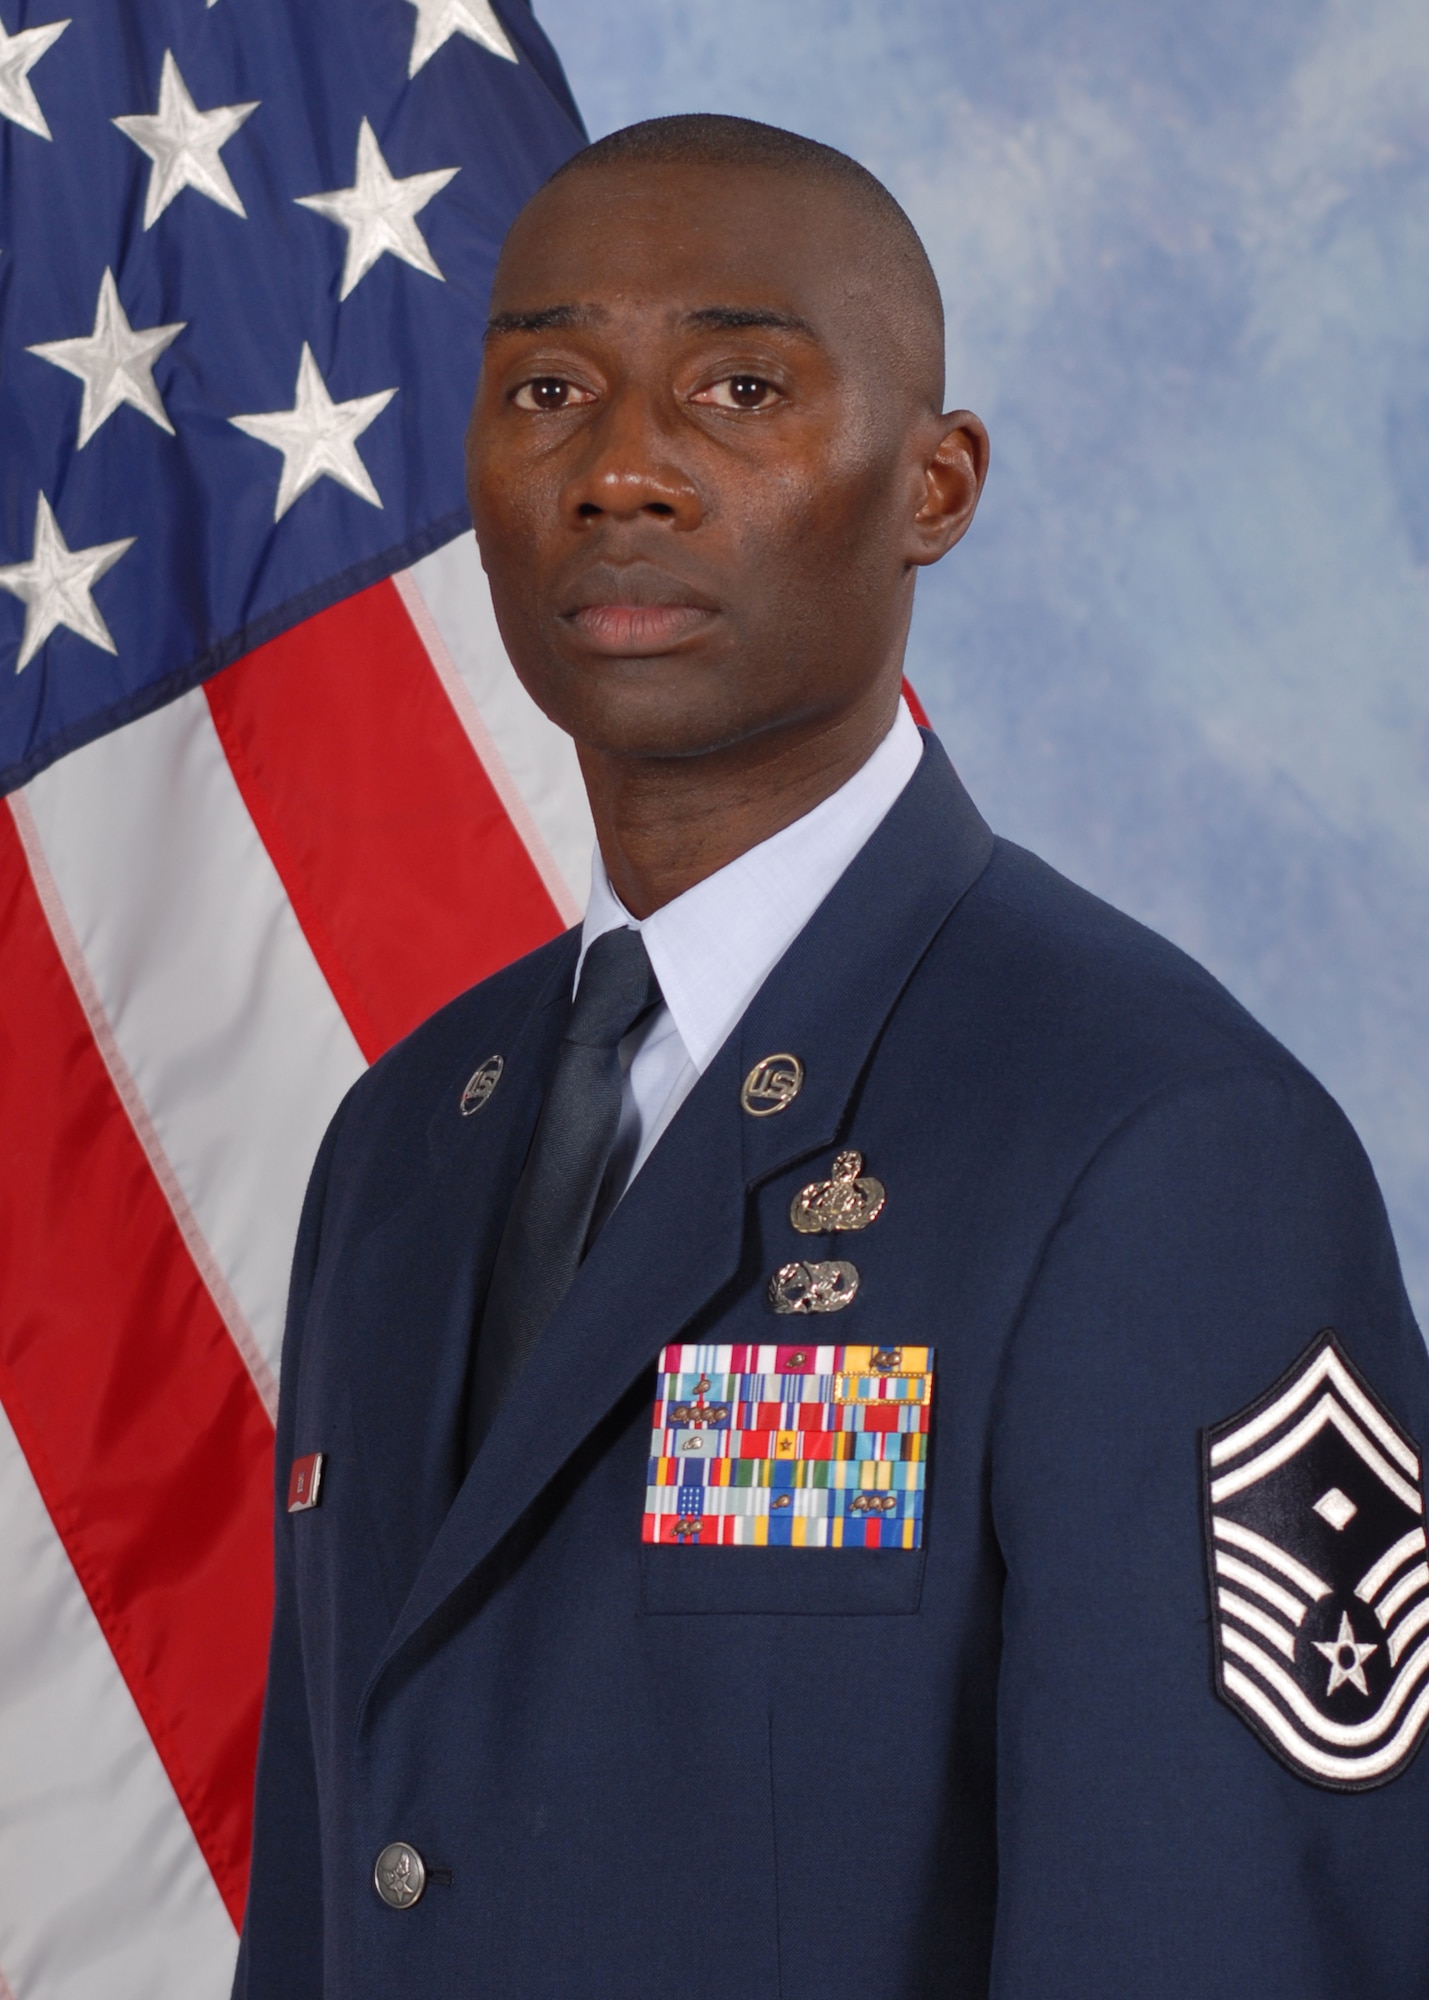 GOODFELLOW AIR FORCE BASE, Texas -- Senior Master Sgt. Hamp Lee III, 316th Training Squadron, is the 17th Training Wing 2013 First Sergeant of the Year. (U.S. Air Force photo/ 17th Training Wing Public Affairs)